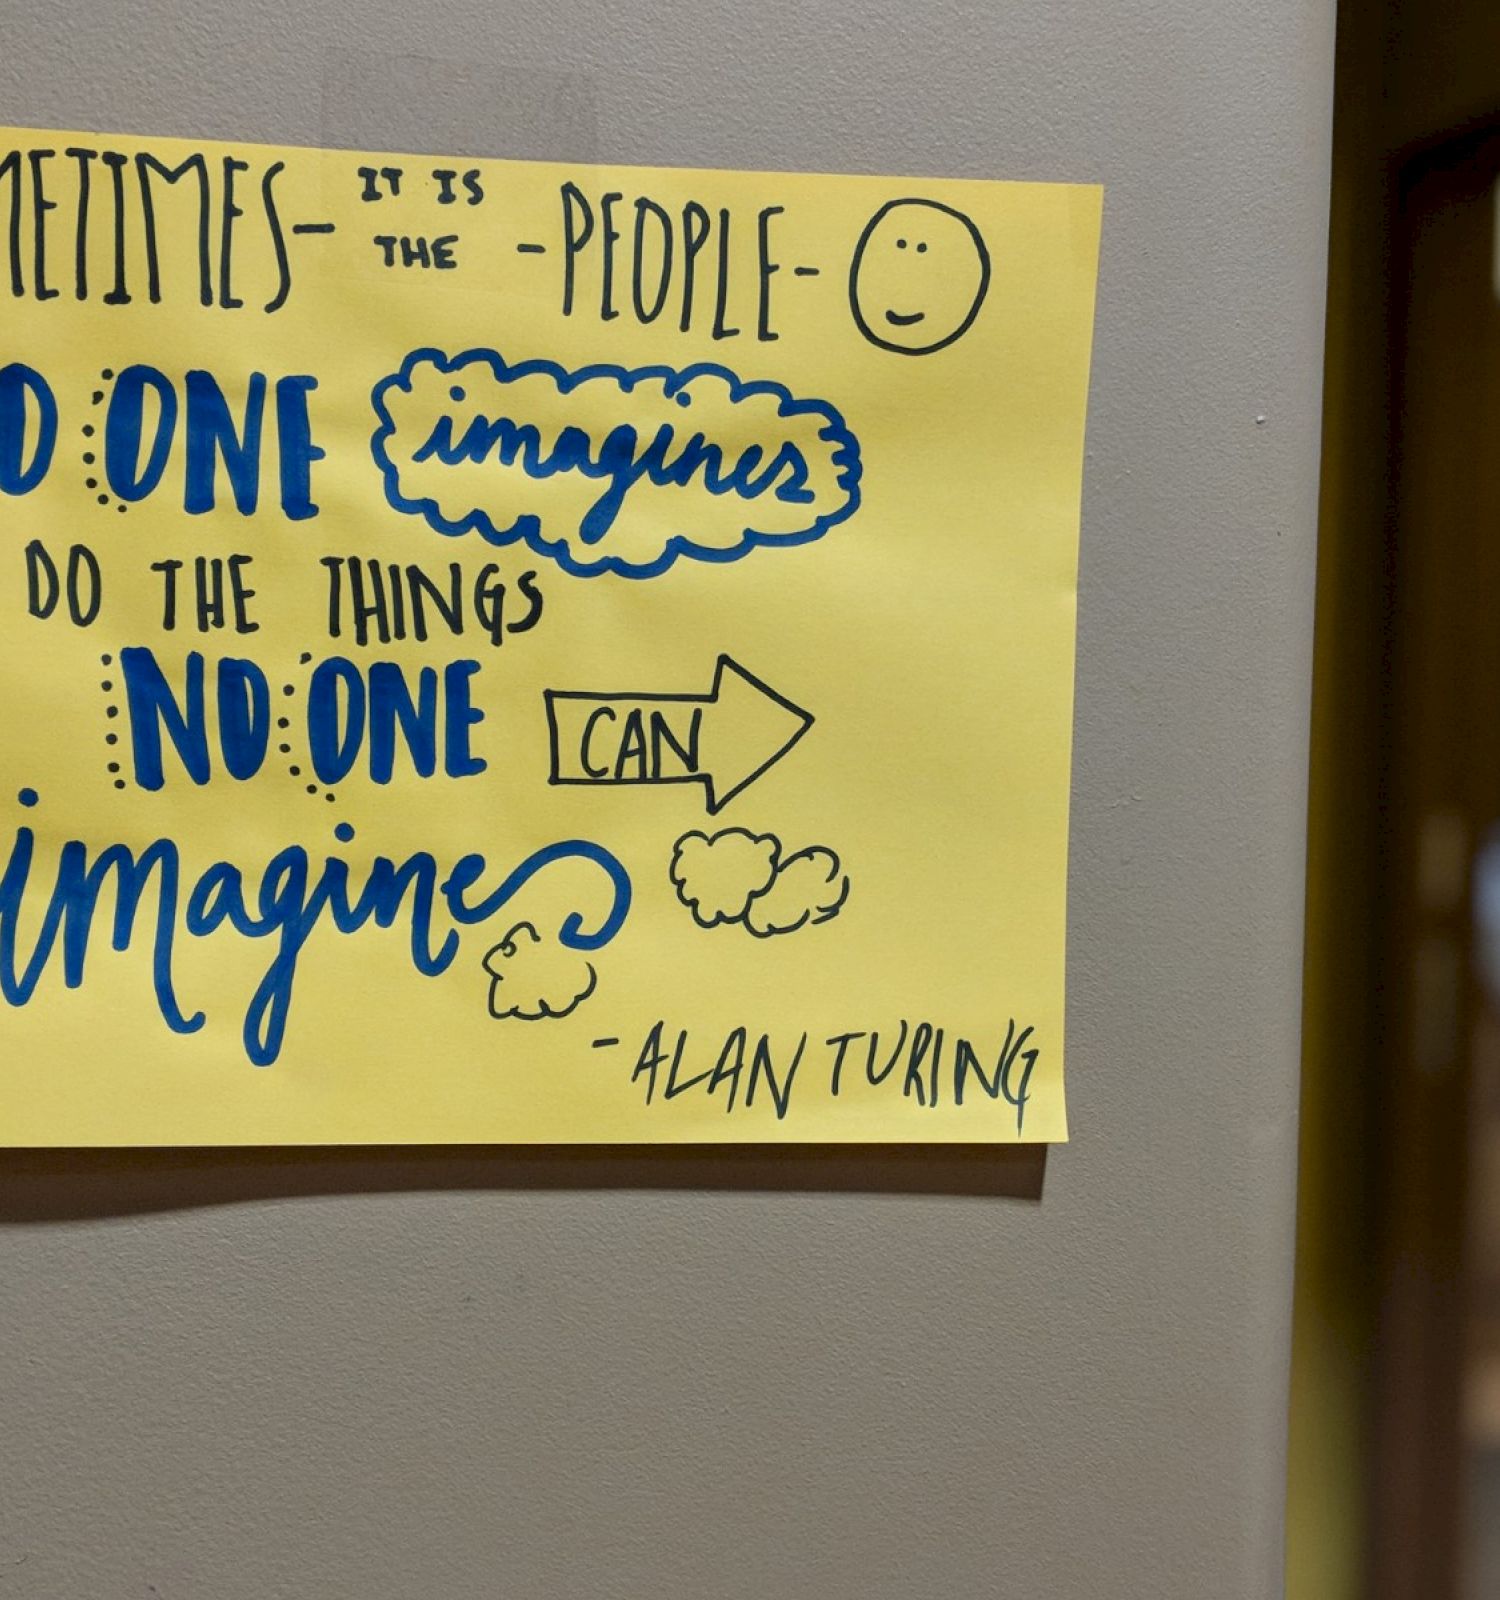 A quote by Alan Turing on a yellow poster reads: 